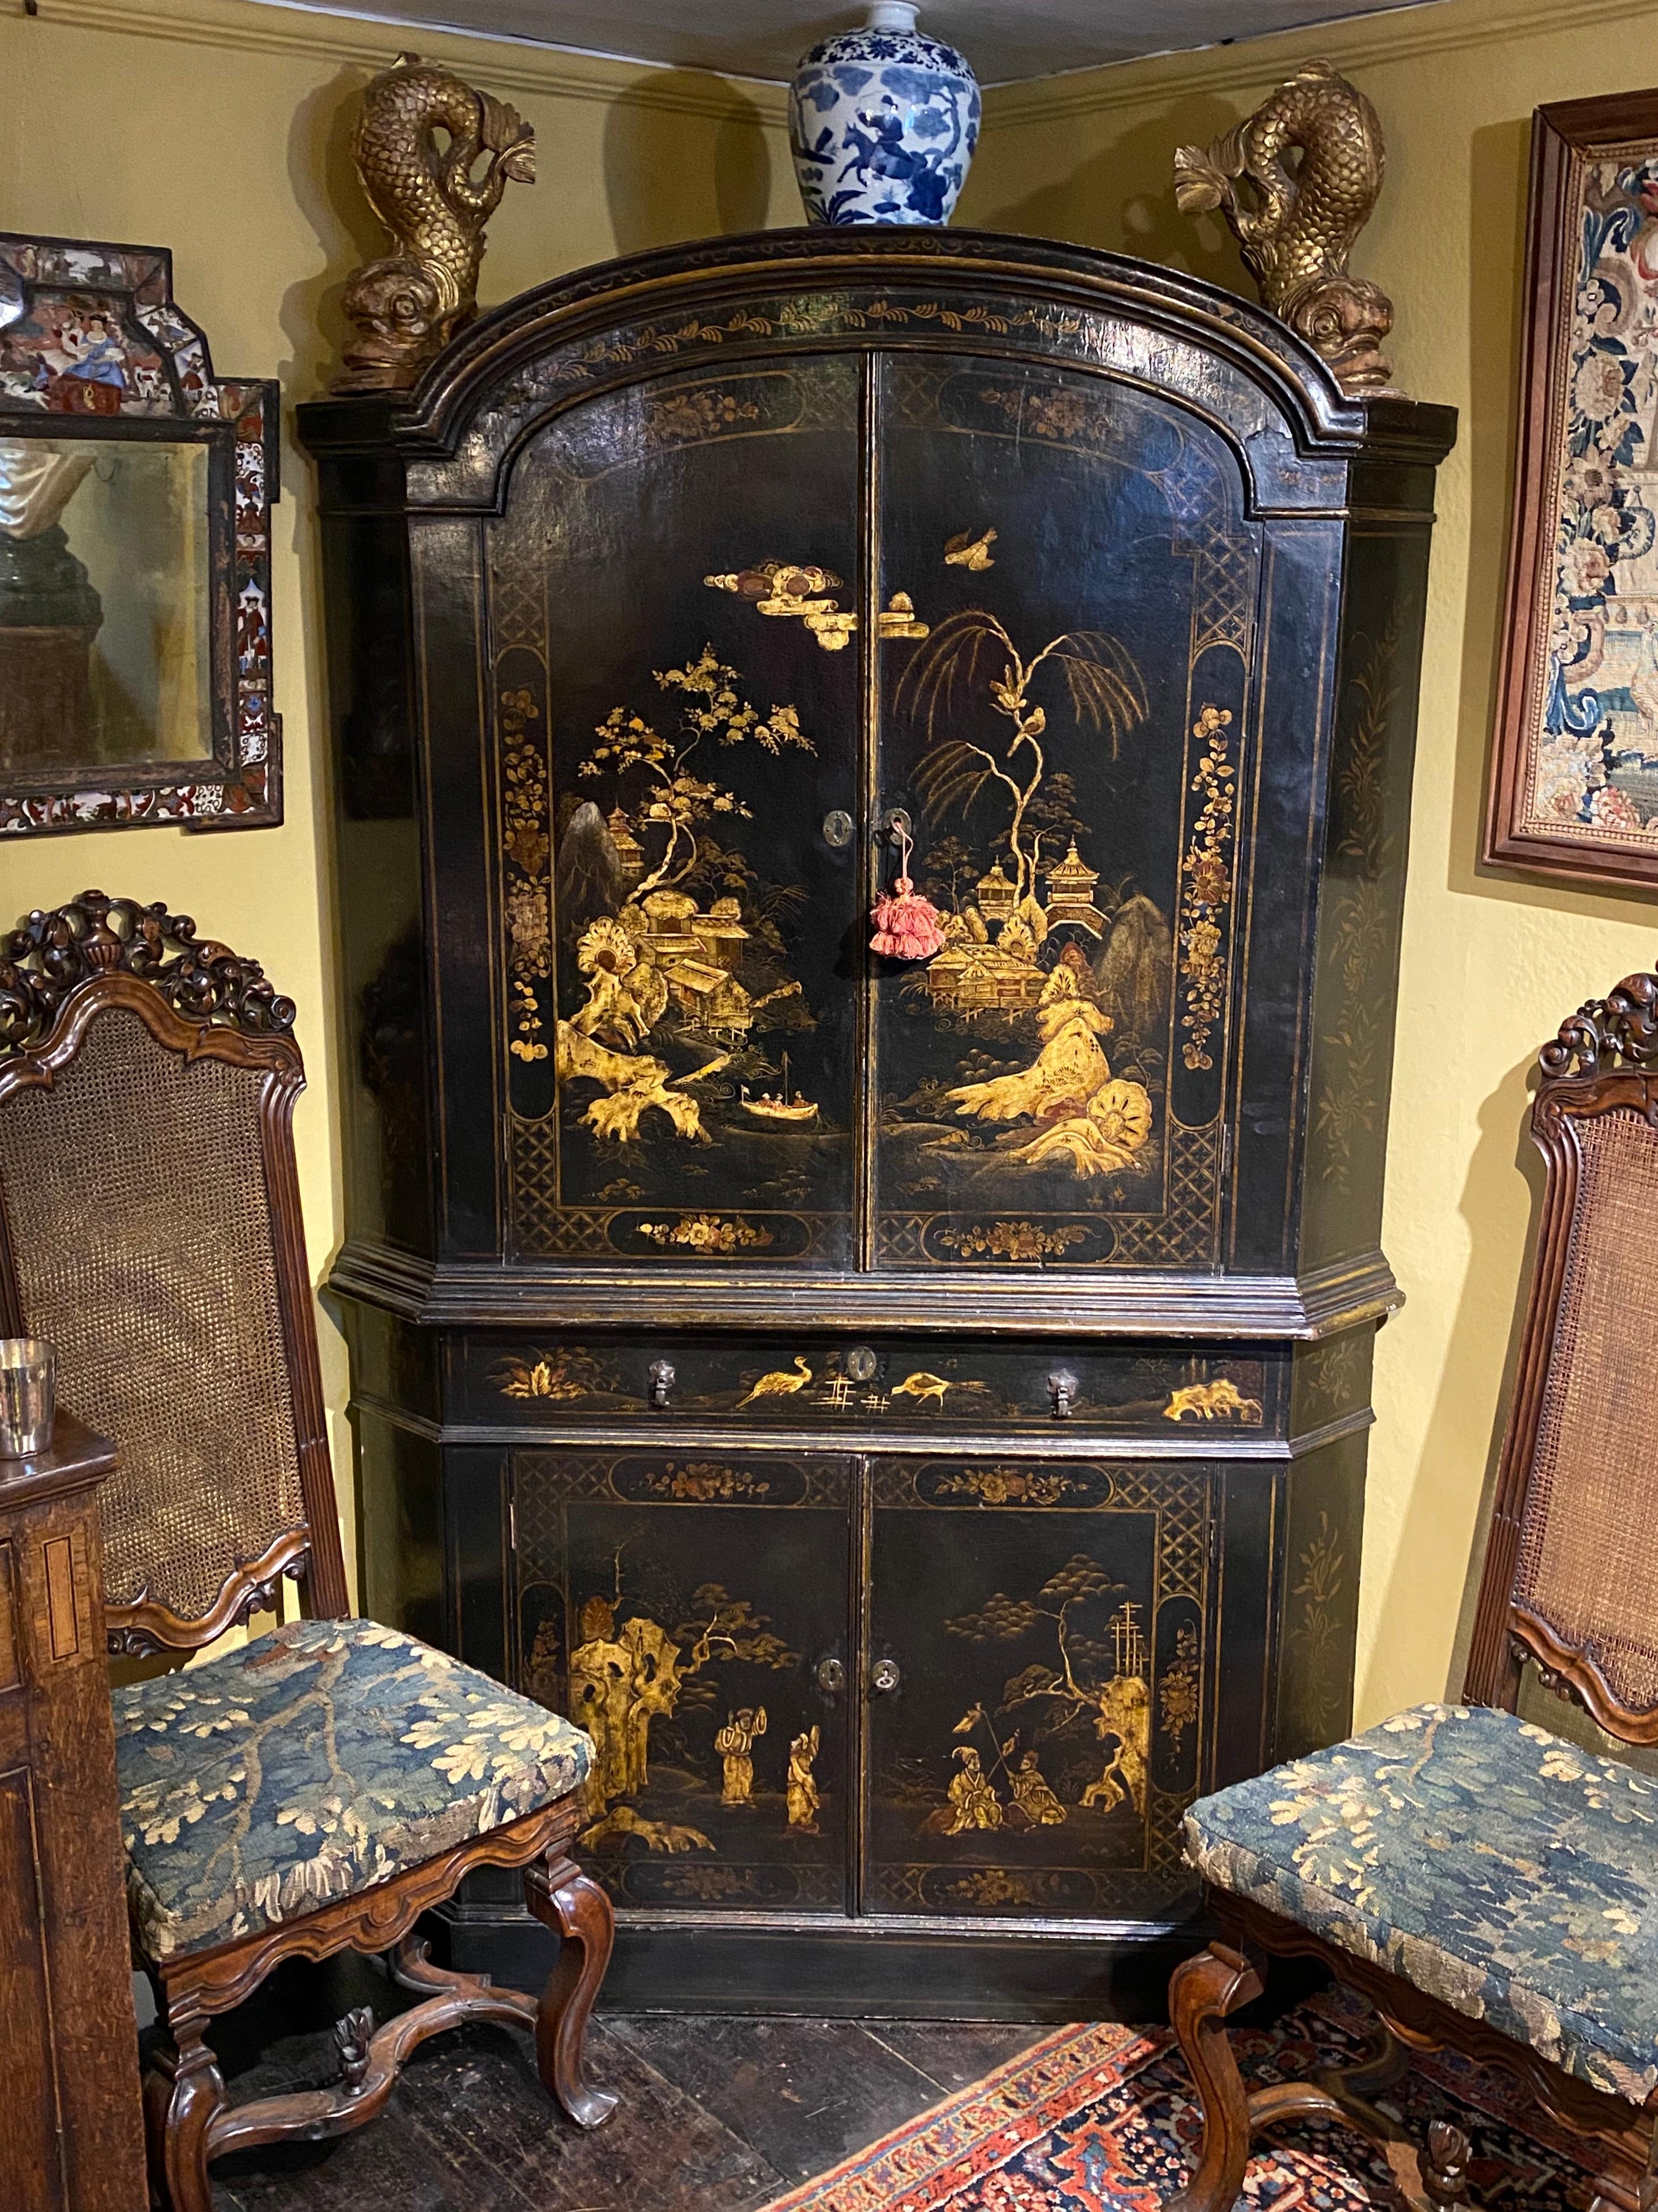 A rare chinoiserie standing double corner cabinet, or cupboard.
English, George I period, ca 1720.

Often erroneously referred to as lacquer work, this is in fact japanned. Beautifully decorated with idyllic scenes of rockwork, pagodas, people,